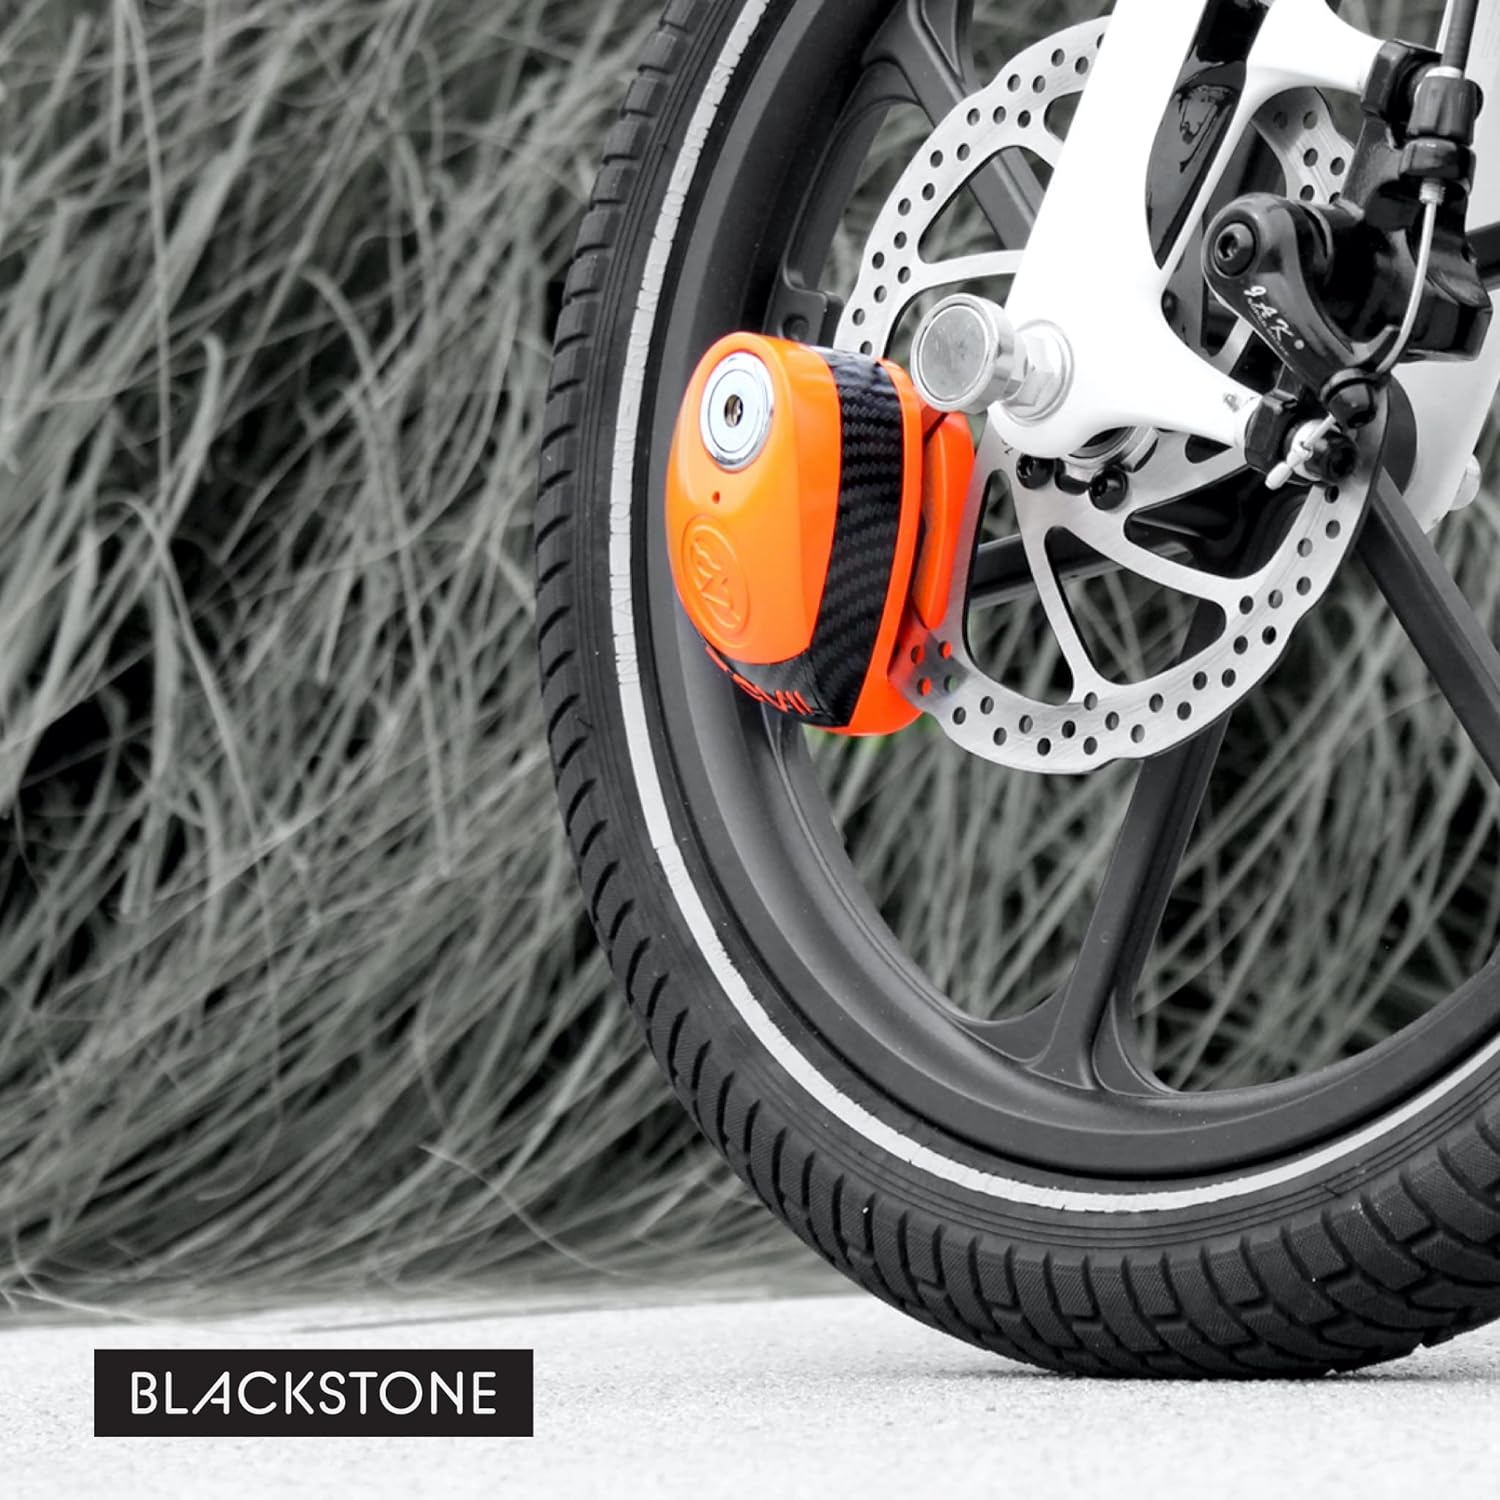 In this image, we see a modern and the bold red disc lock attached to the front brake disc of a motorcycle. The color of the lock provides a striking contrast against the grayscale background, drawing the viewer’s attention immediately to the security device. The disc lock is compact, yet its placement suggests a robust and effective deterrent against theft. The "BLACKSTONE" branding is discreetly positioned in the lower right corner, suggesting a focus on the product's sleek design and functionality